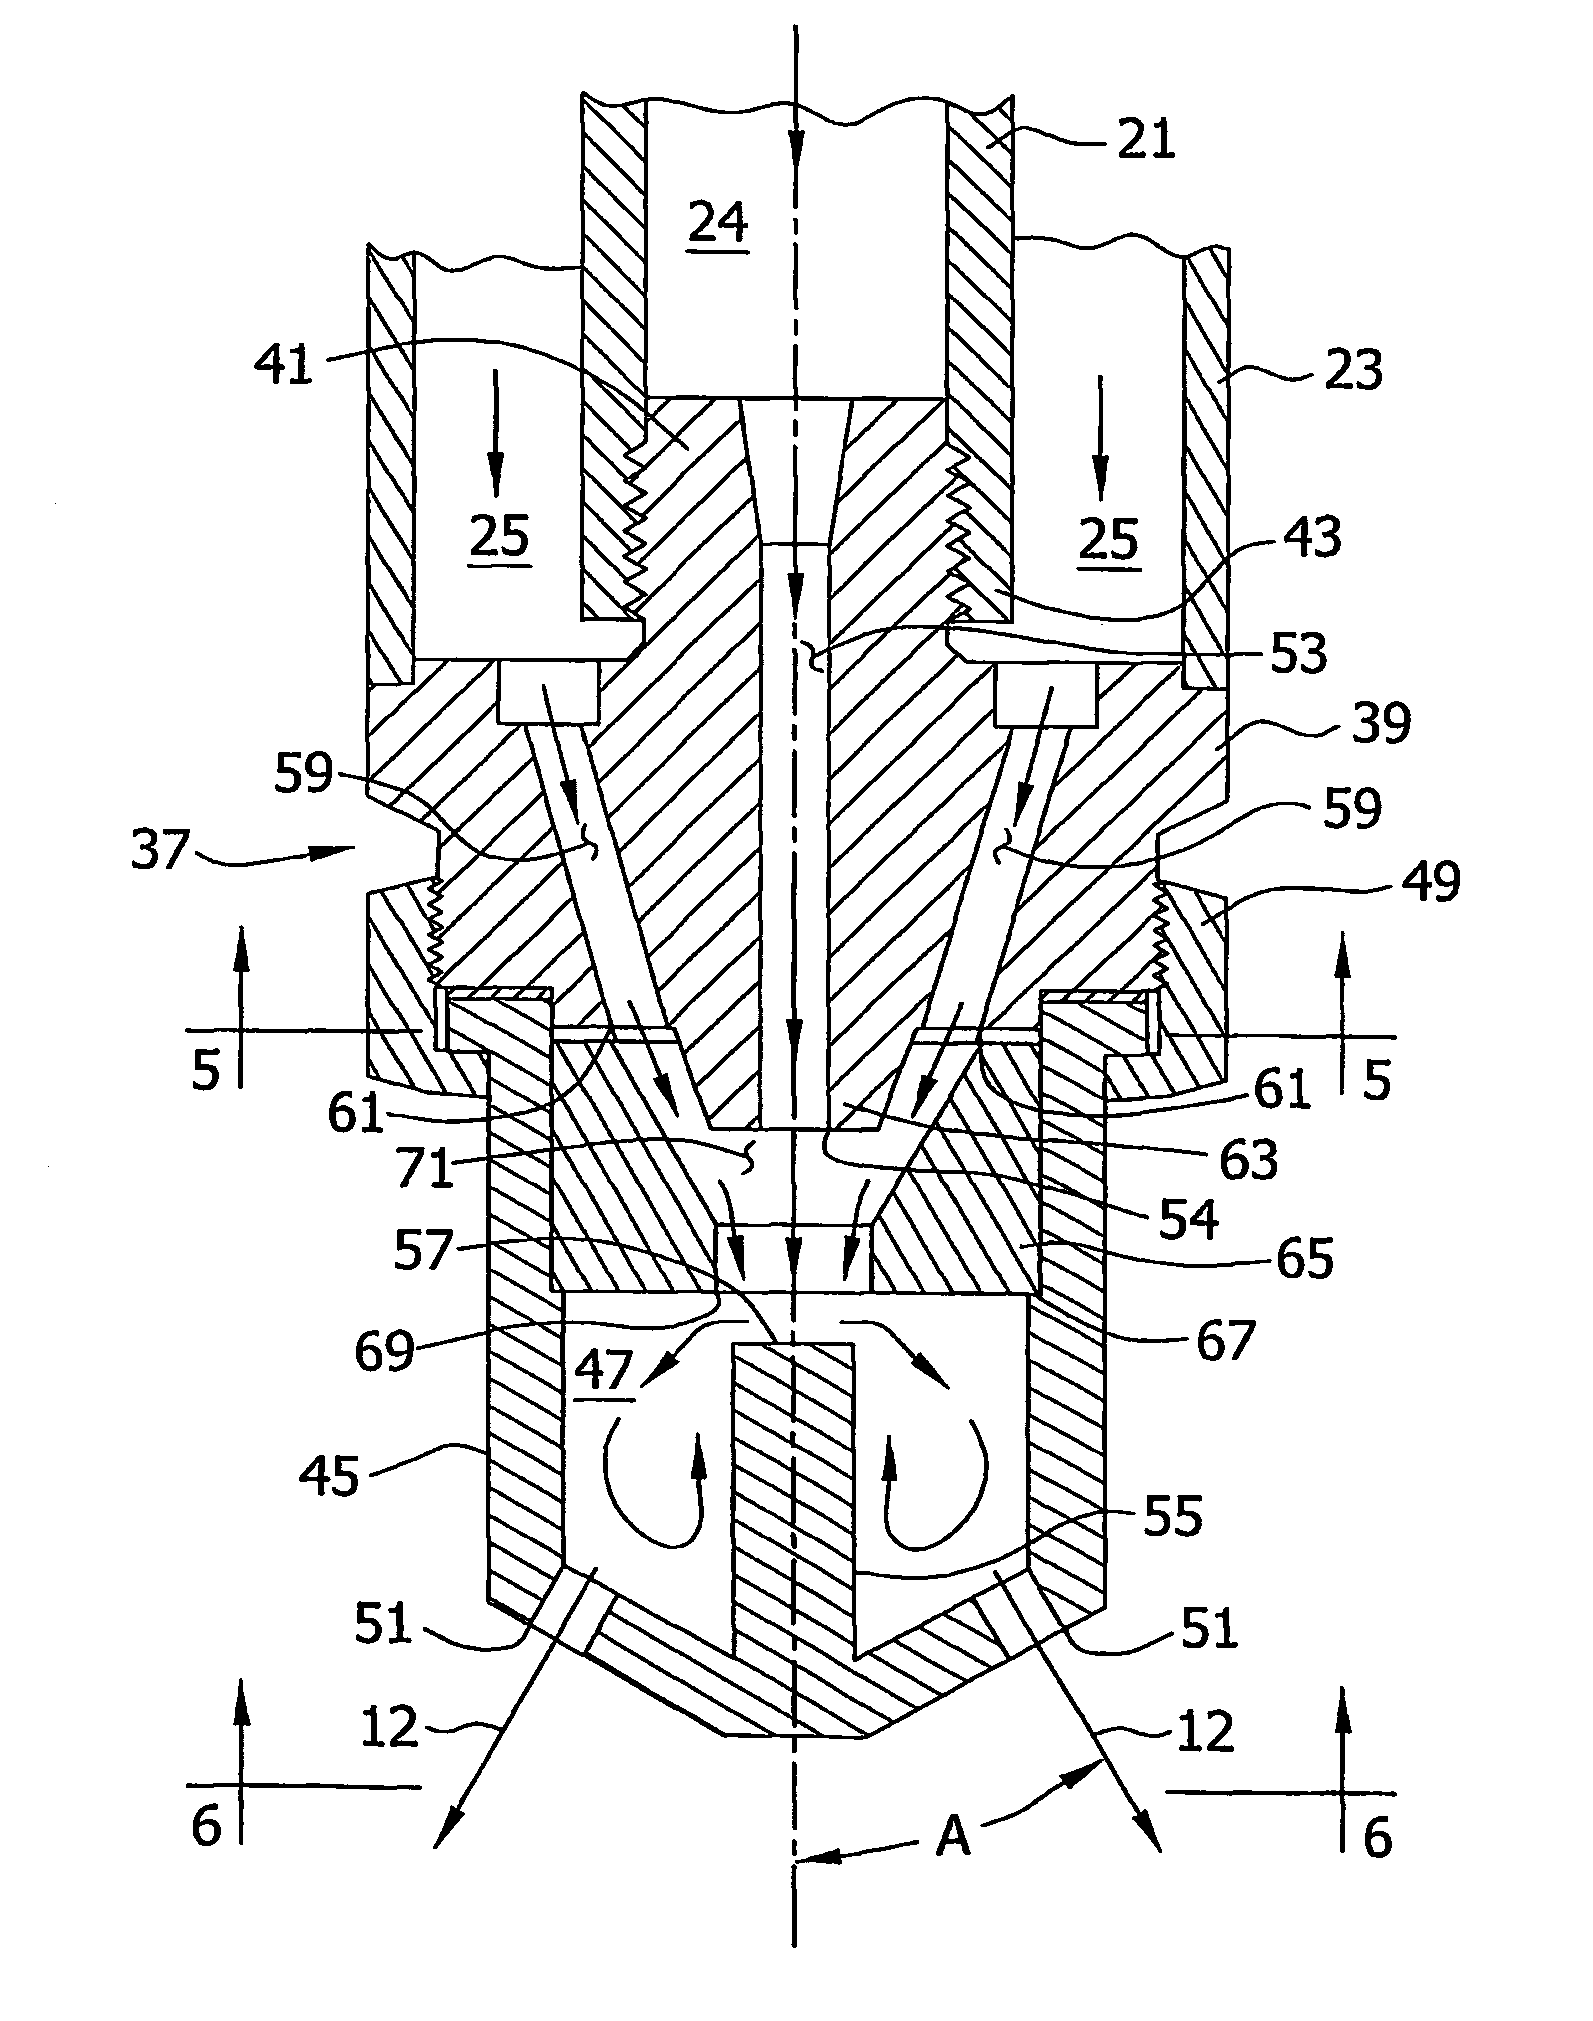 Process and apparatus for the combustion of a sulfur-containing liquid